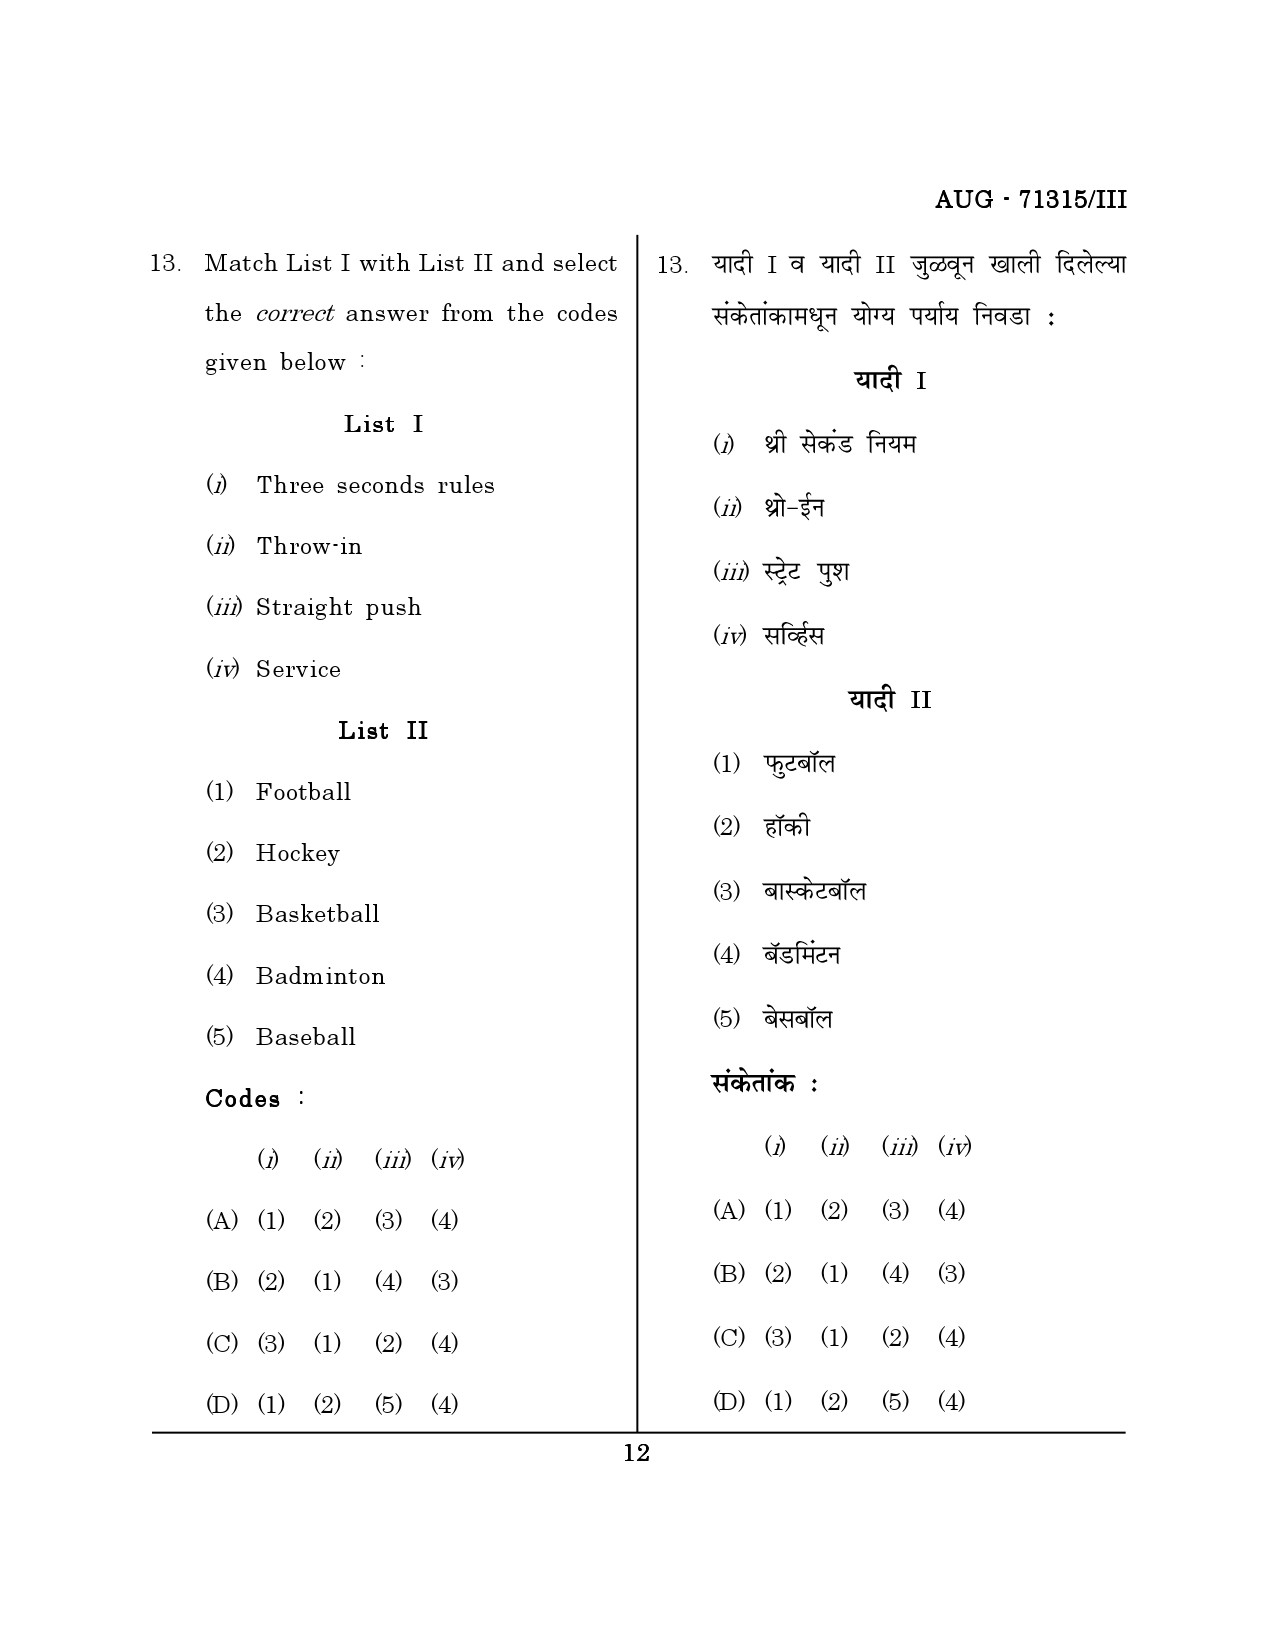 Maharashtra SET Physical Education Question Paper III August 2015 11